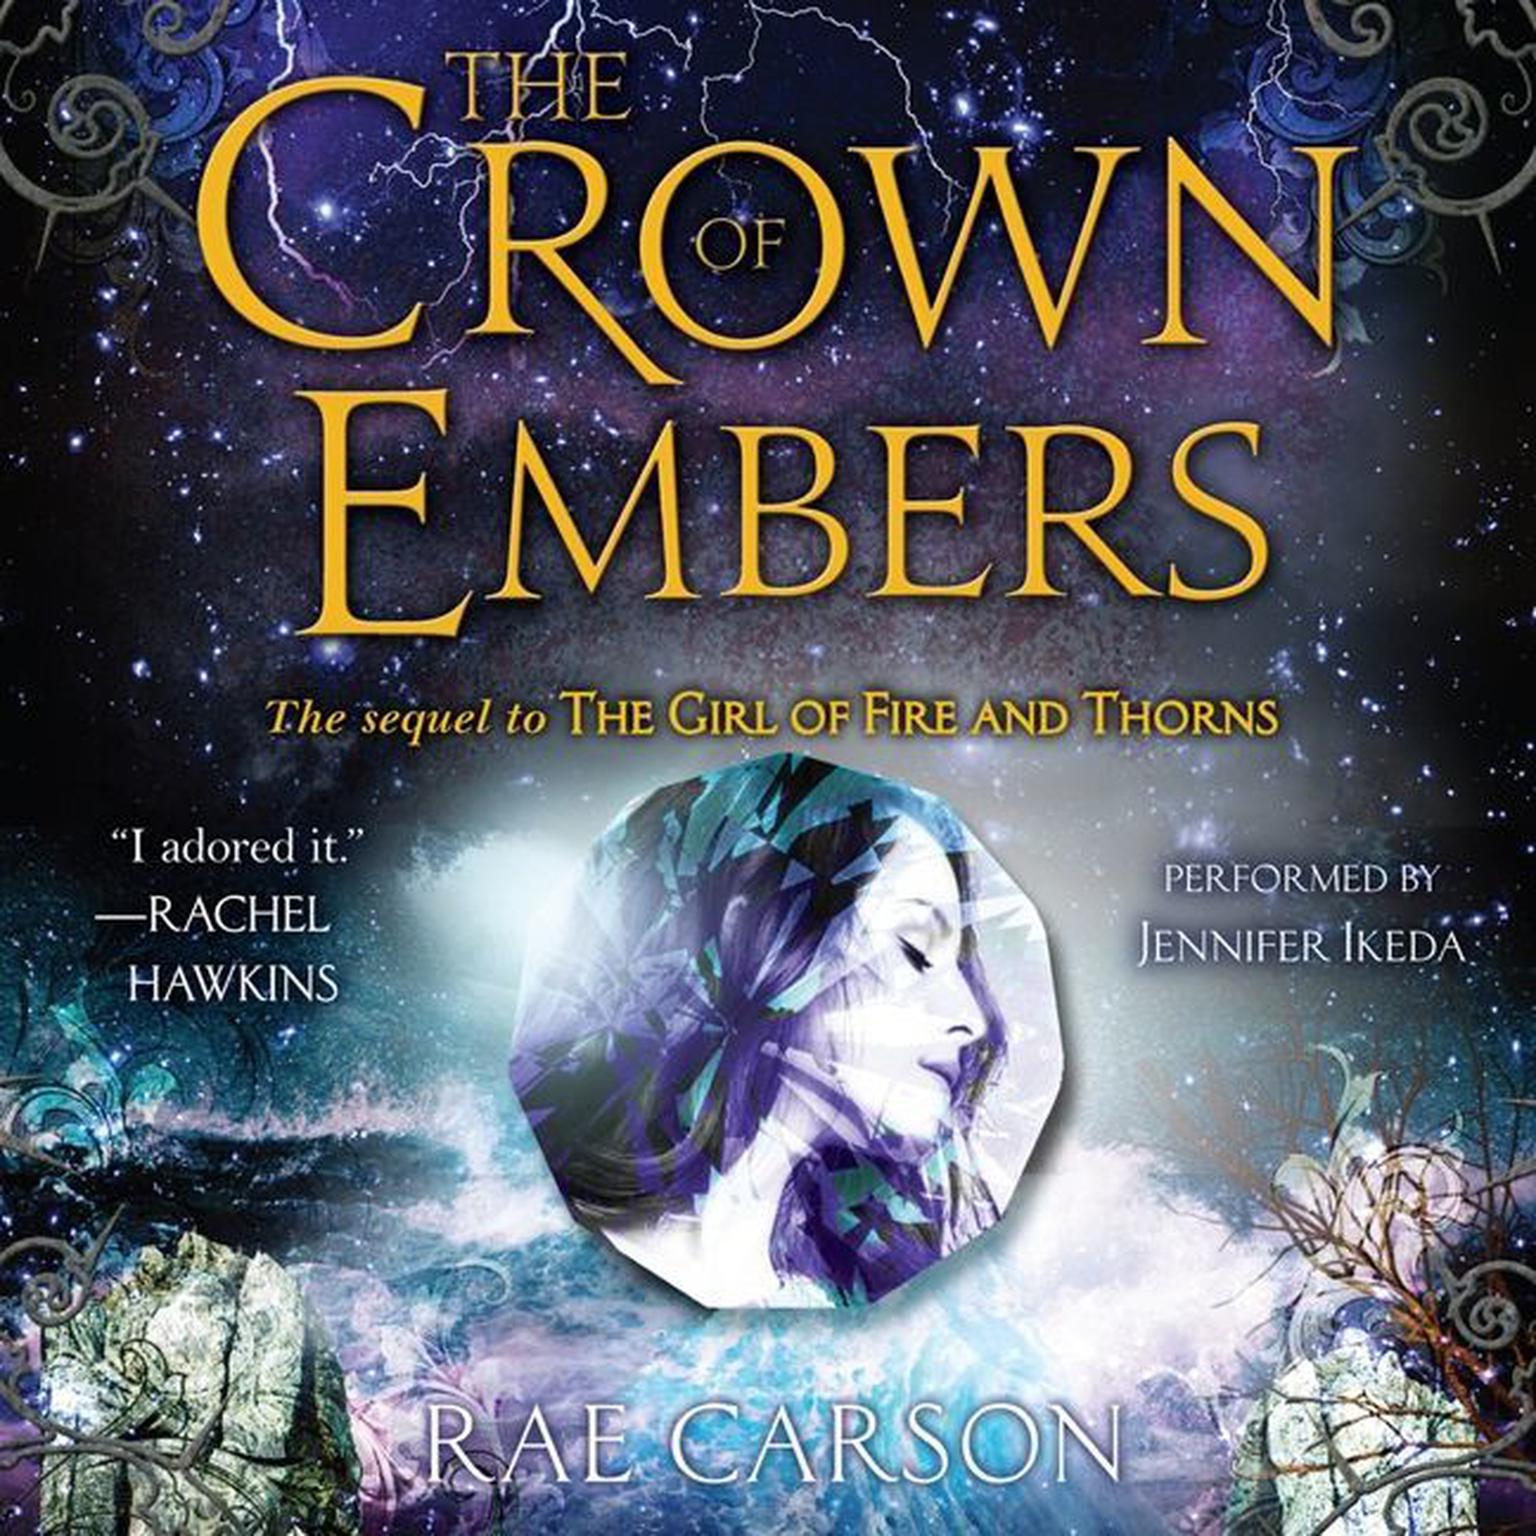 The Crown of Embers Audiobook by Rae Carson Listen Now